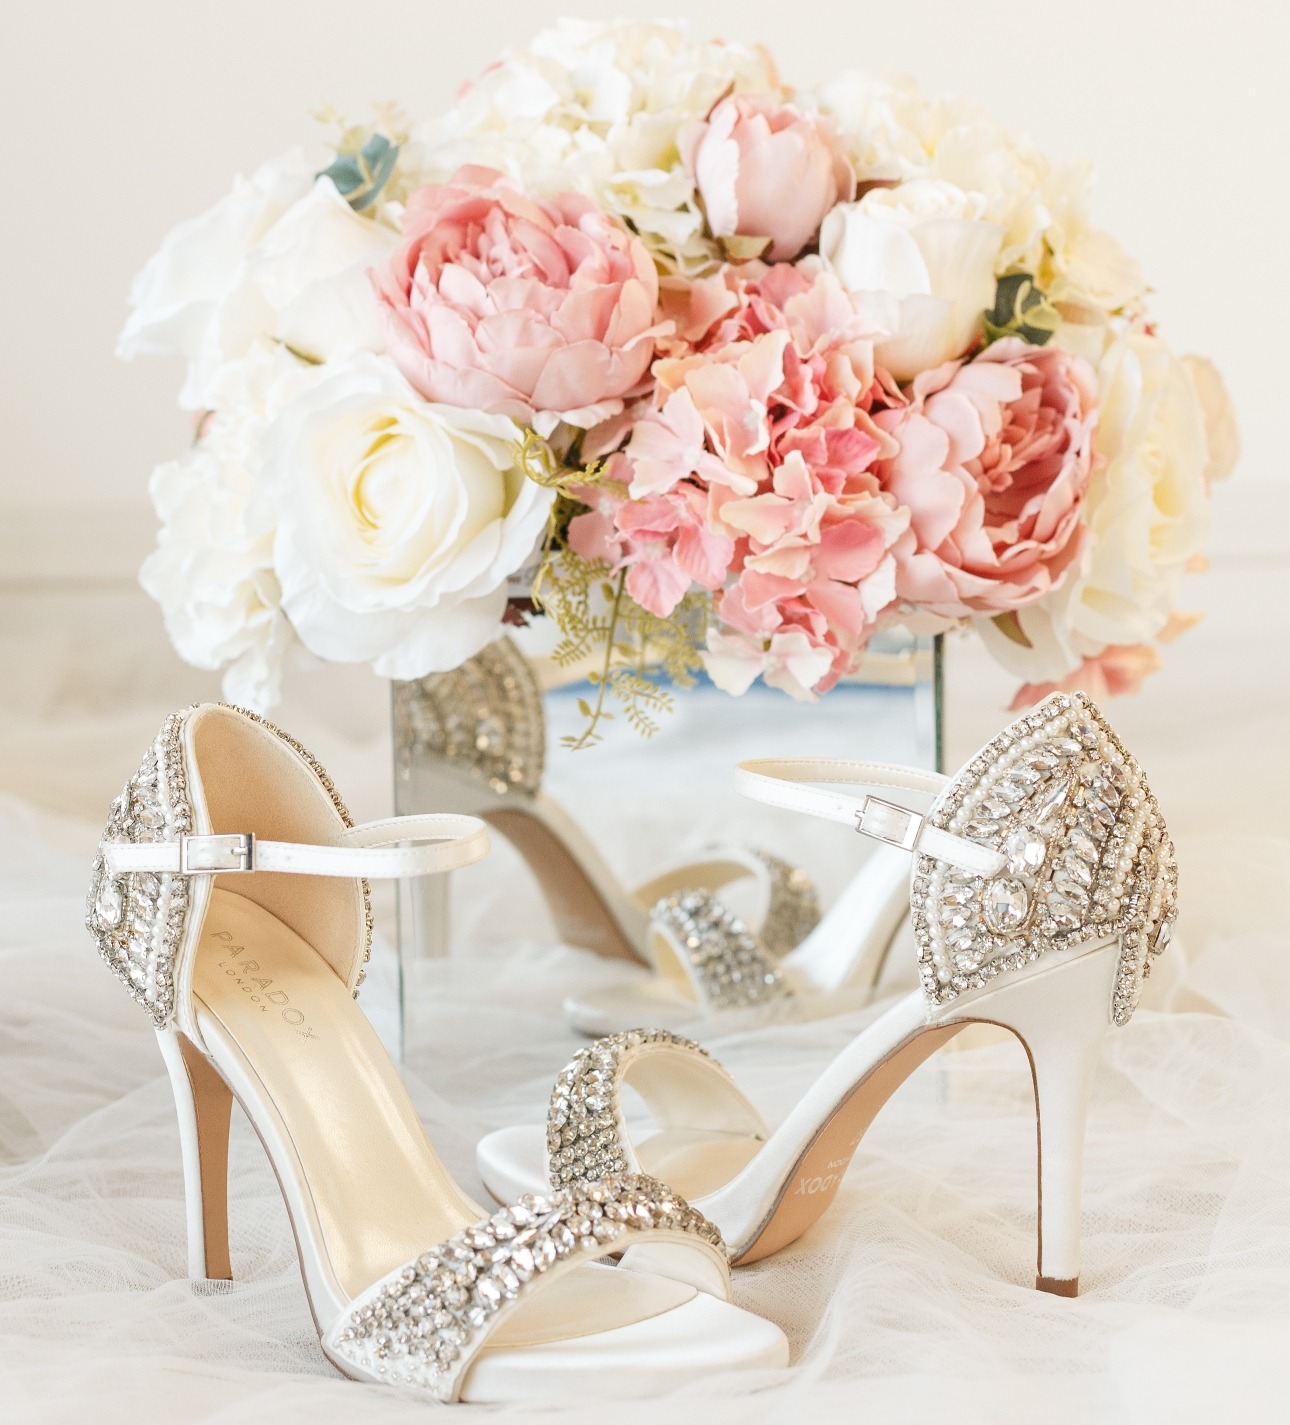 pair of diamond encrusted shoes in front of a floral bouquet 